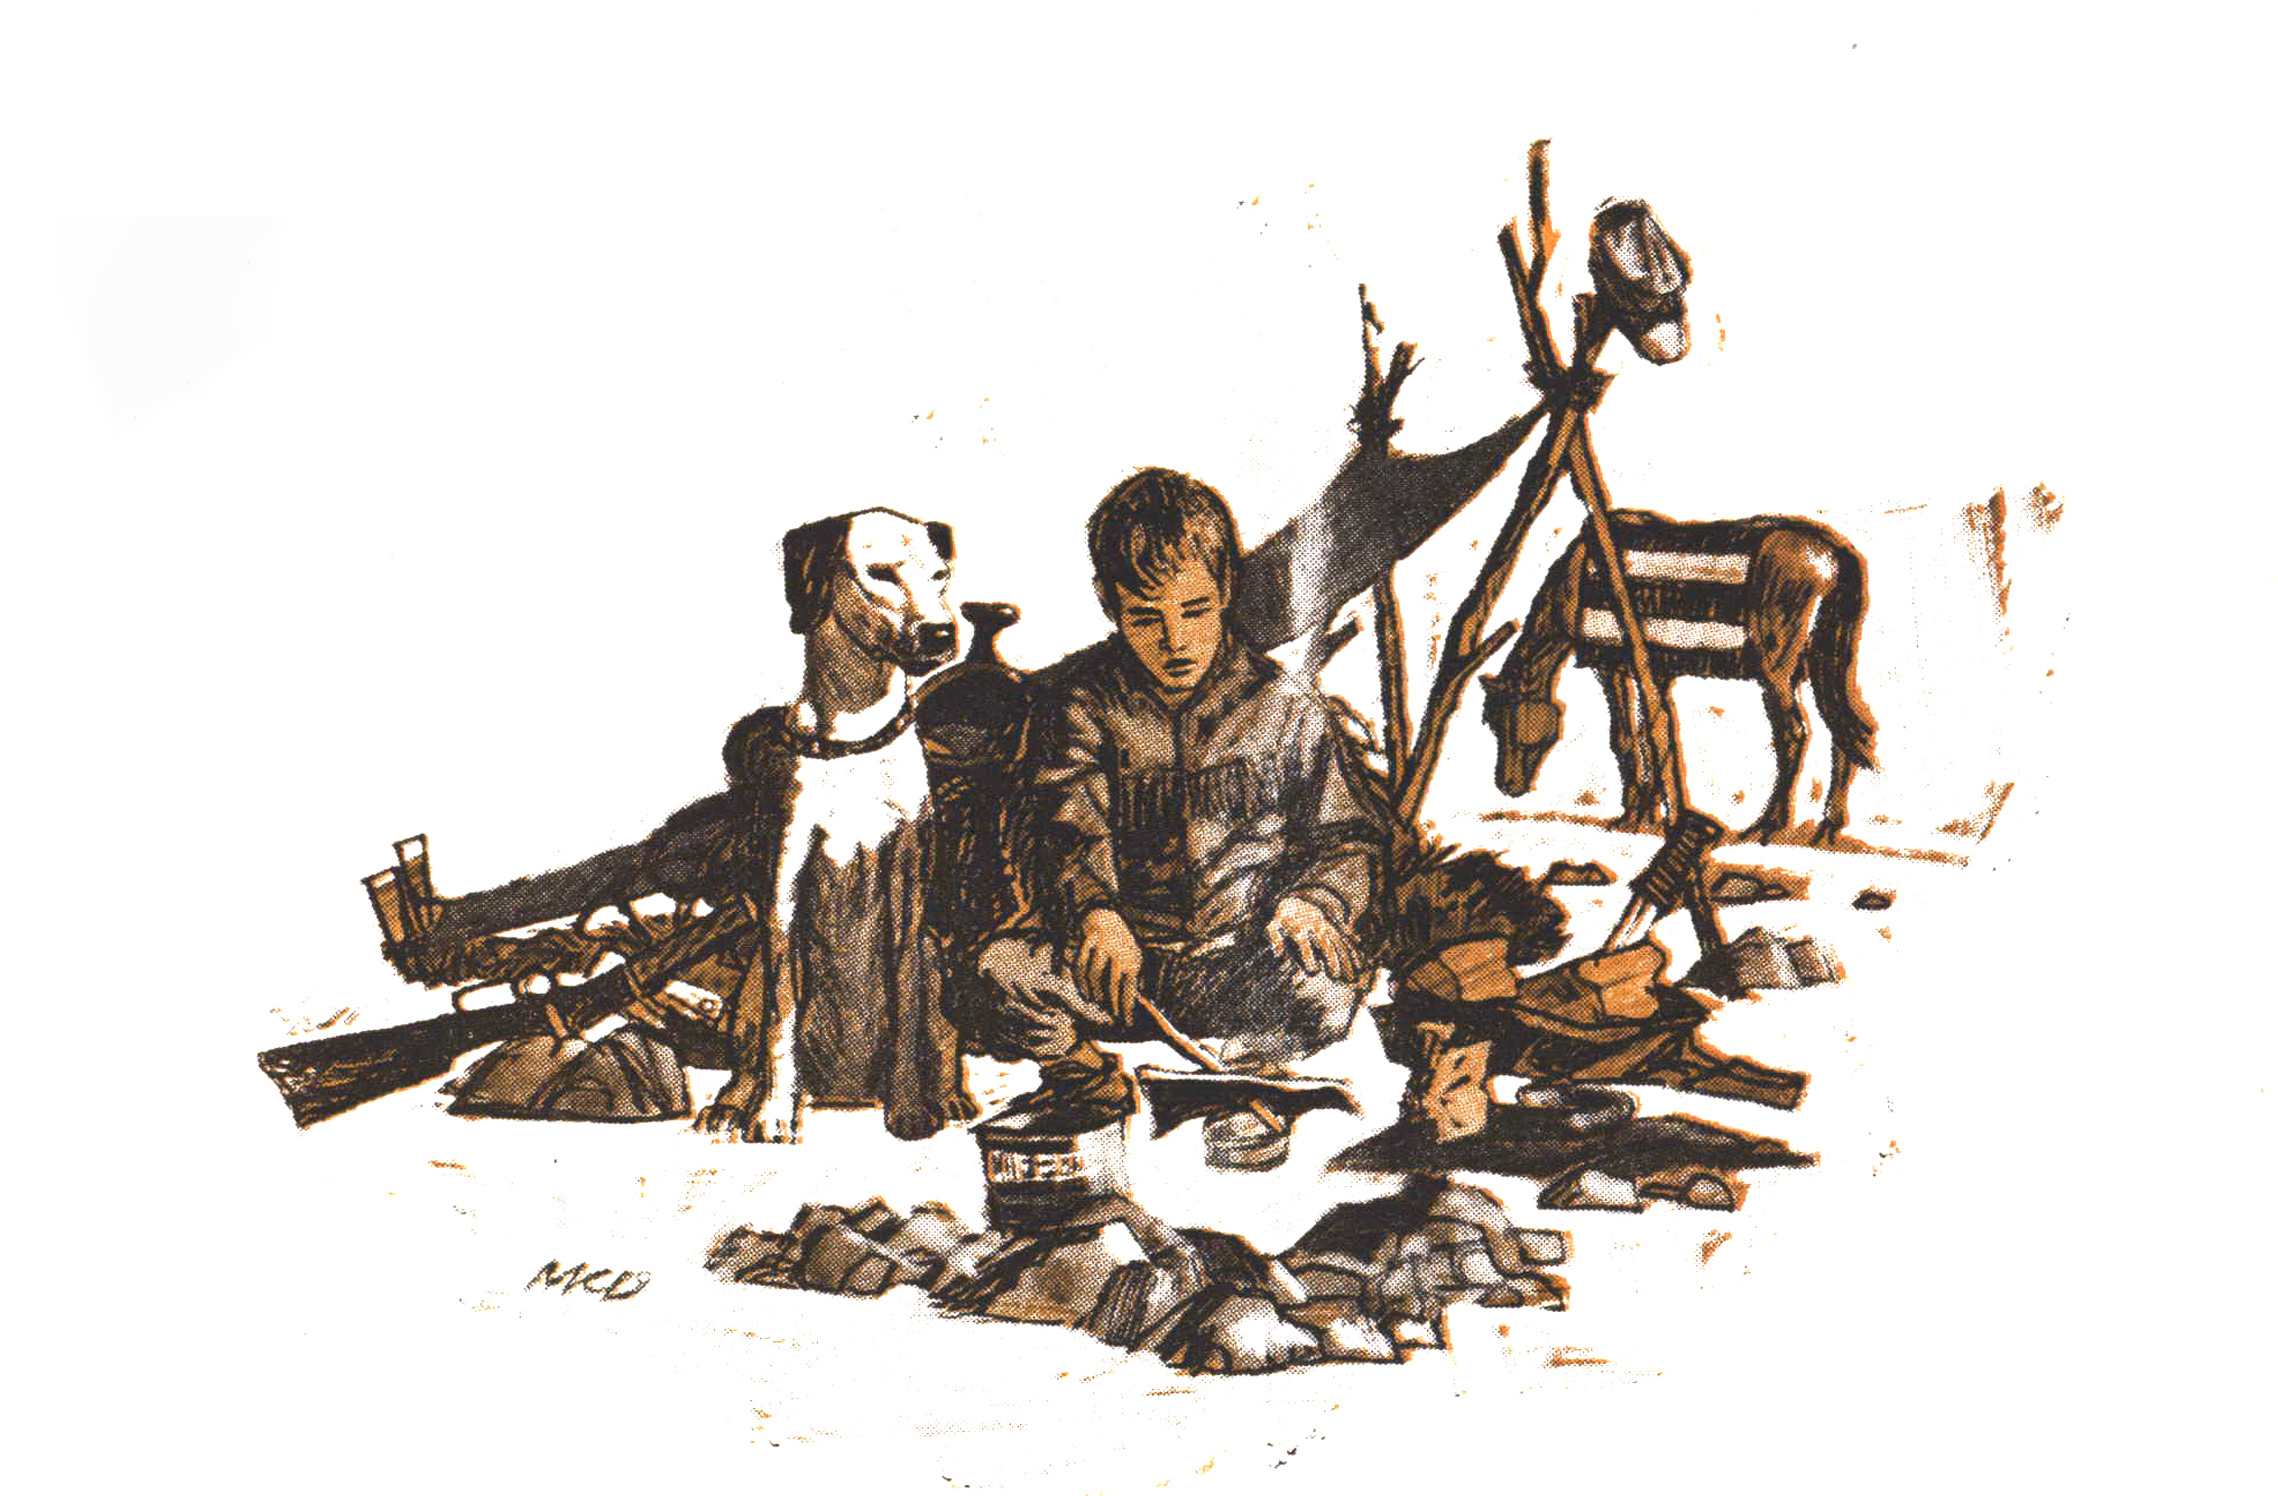 An illustration of a boy cooking over a campfire with his dog beside him.